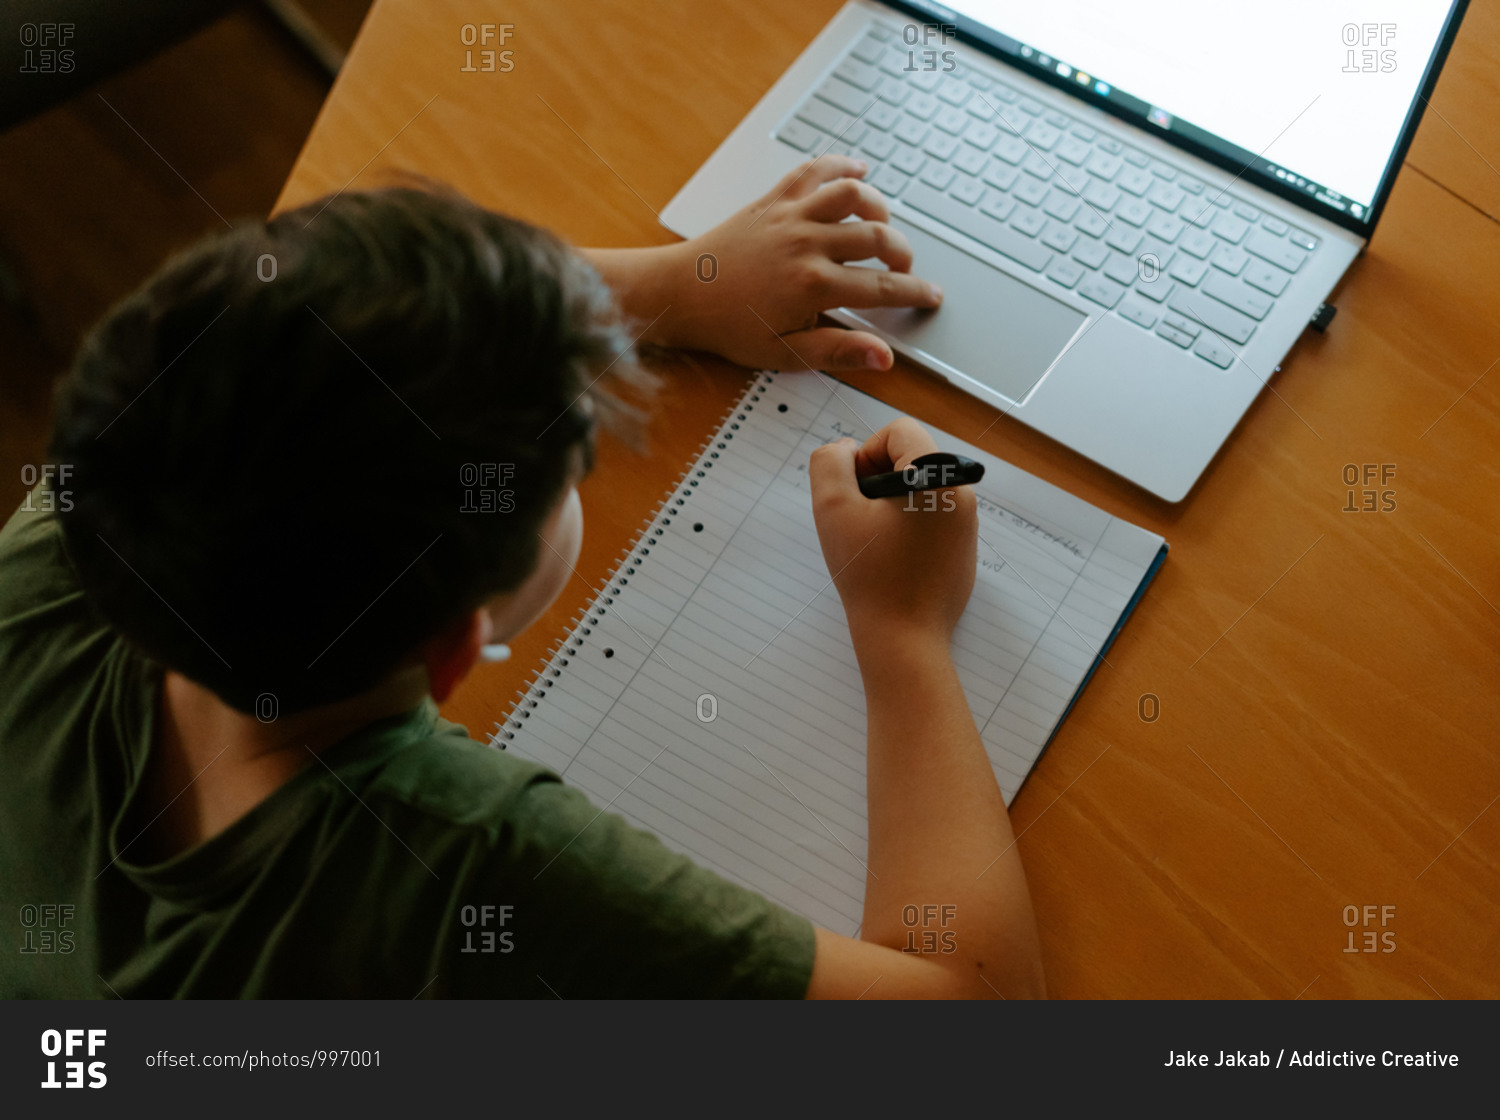 High angle of focused little boy in wireless earphones using laptop and writing down information while doing homework assignment